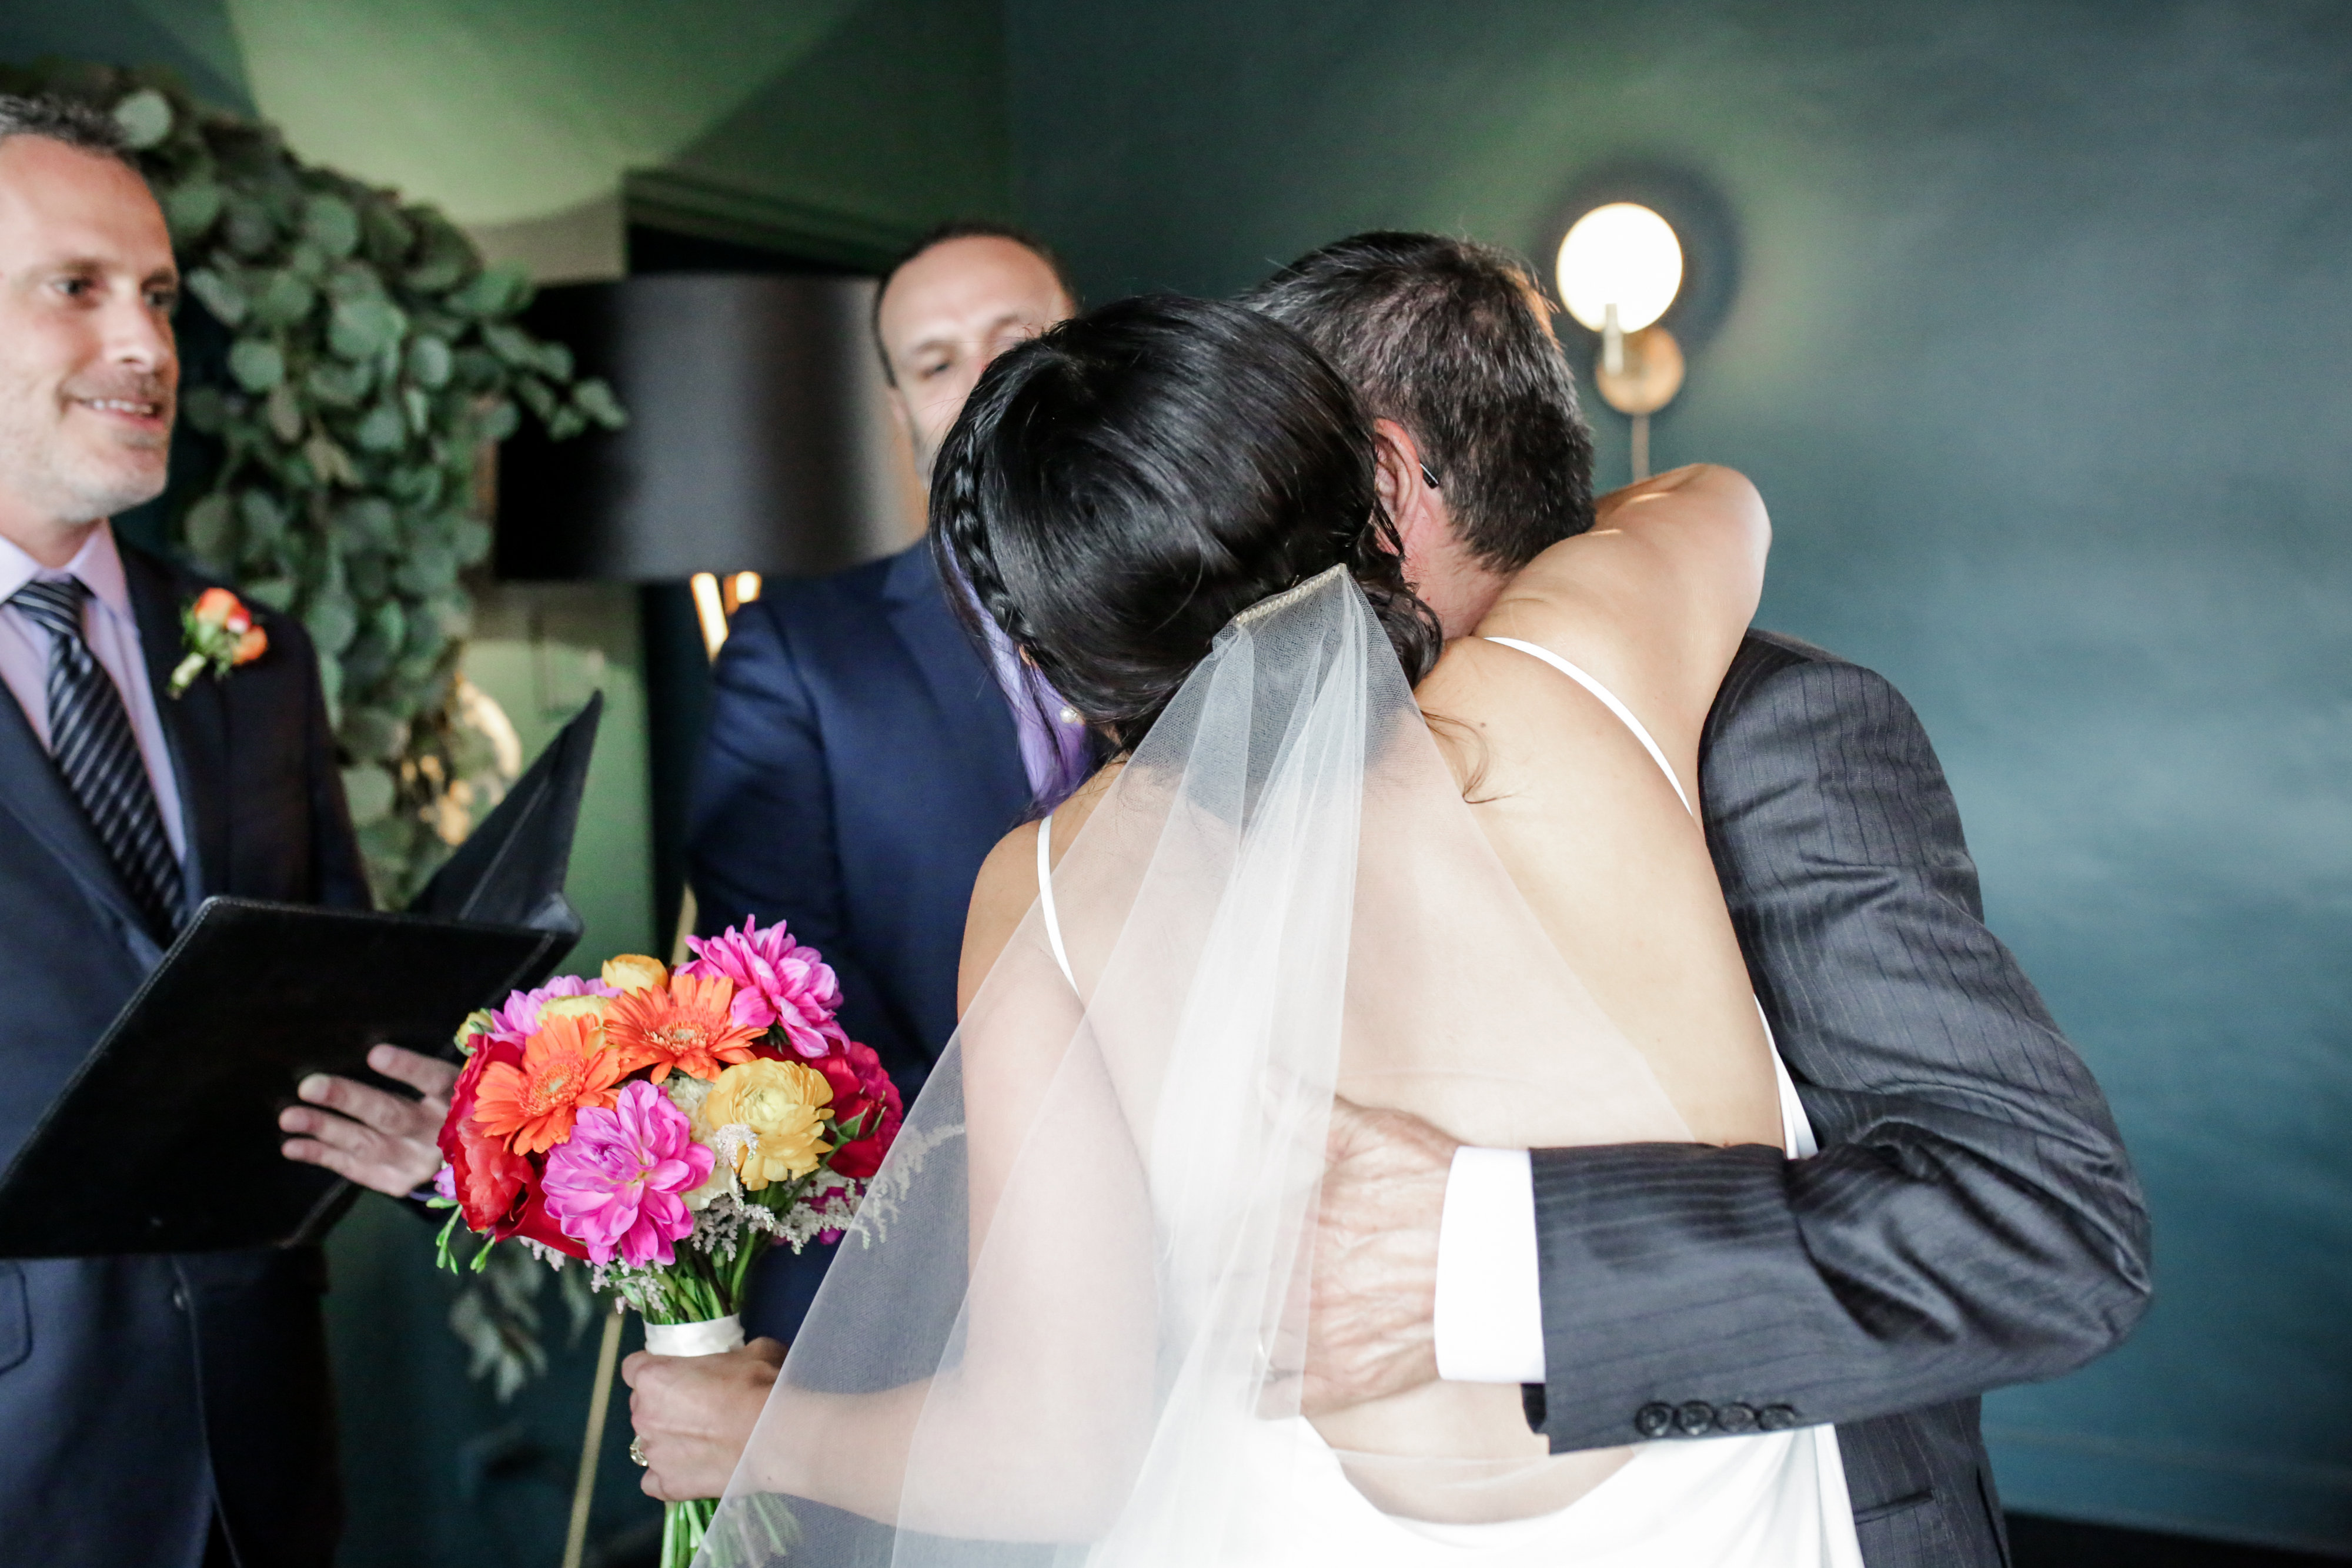 A bride and groom embracing as the officiant pronounces them married